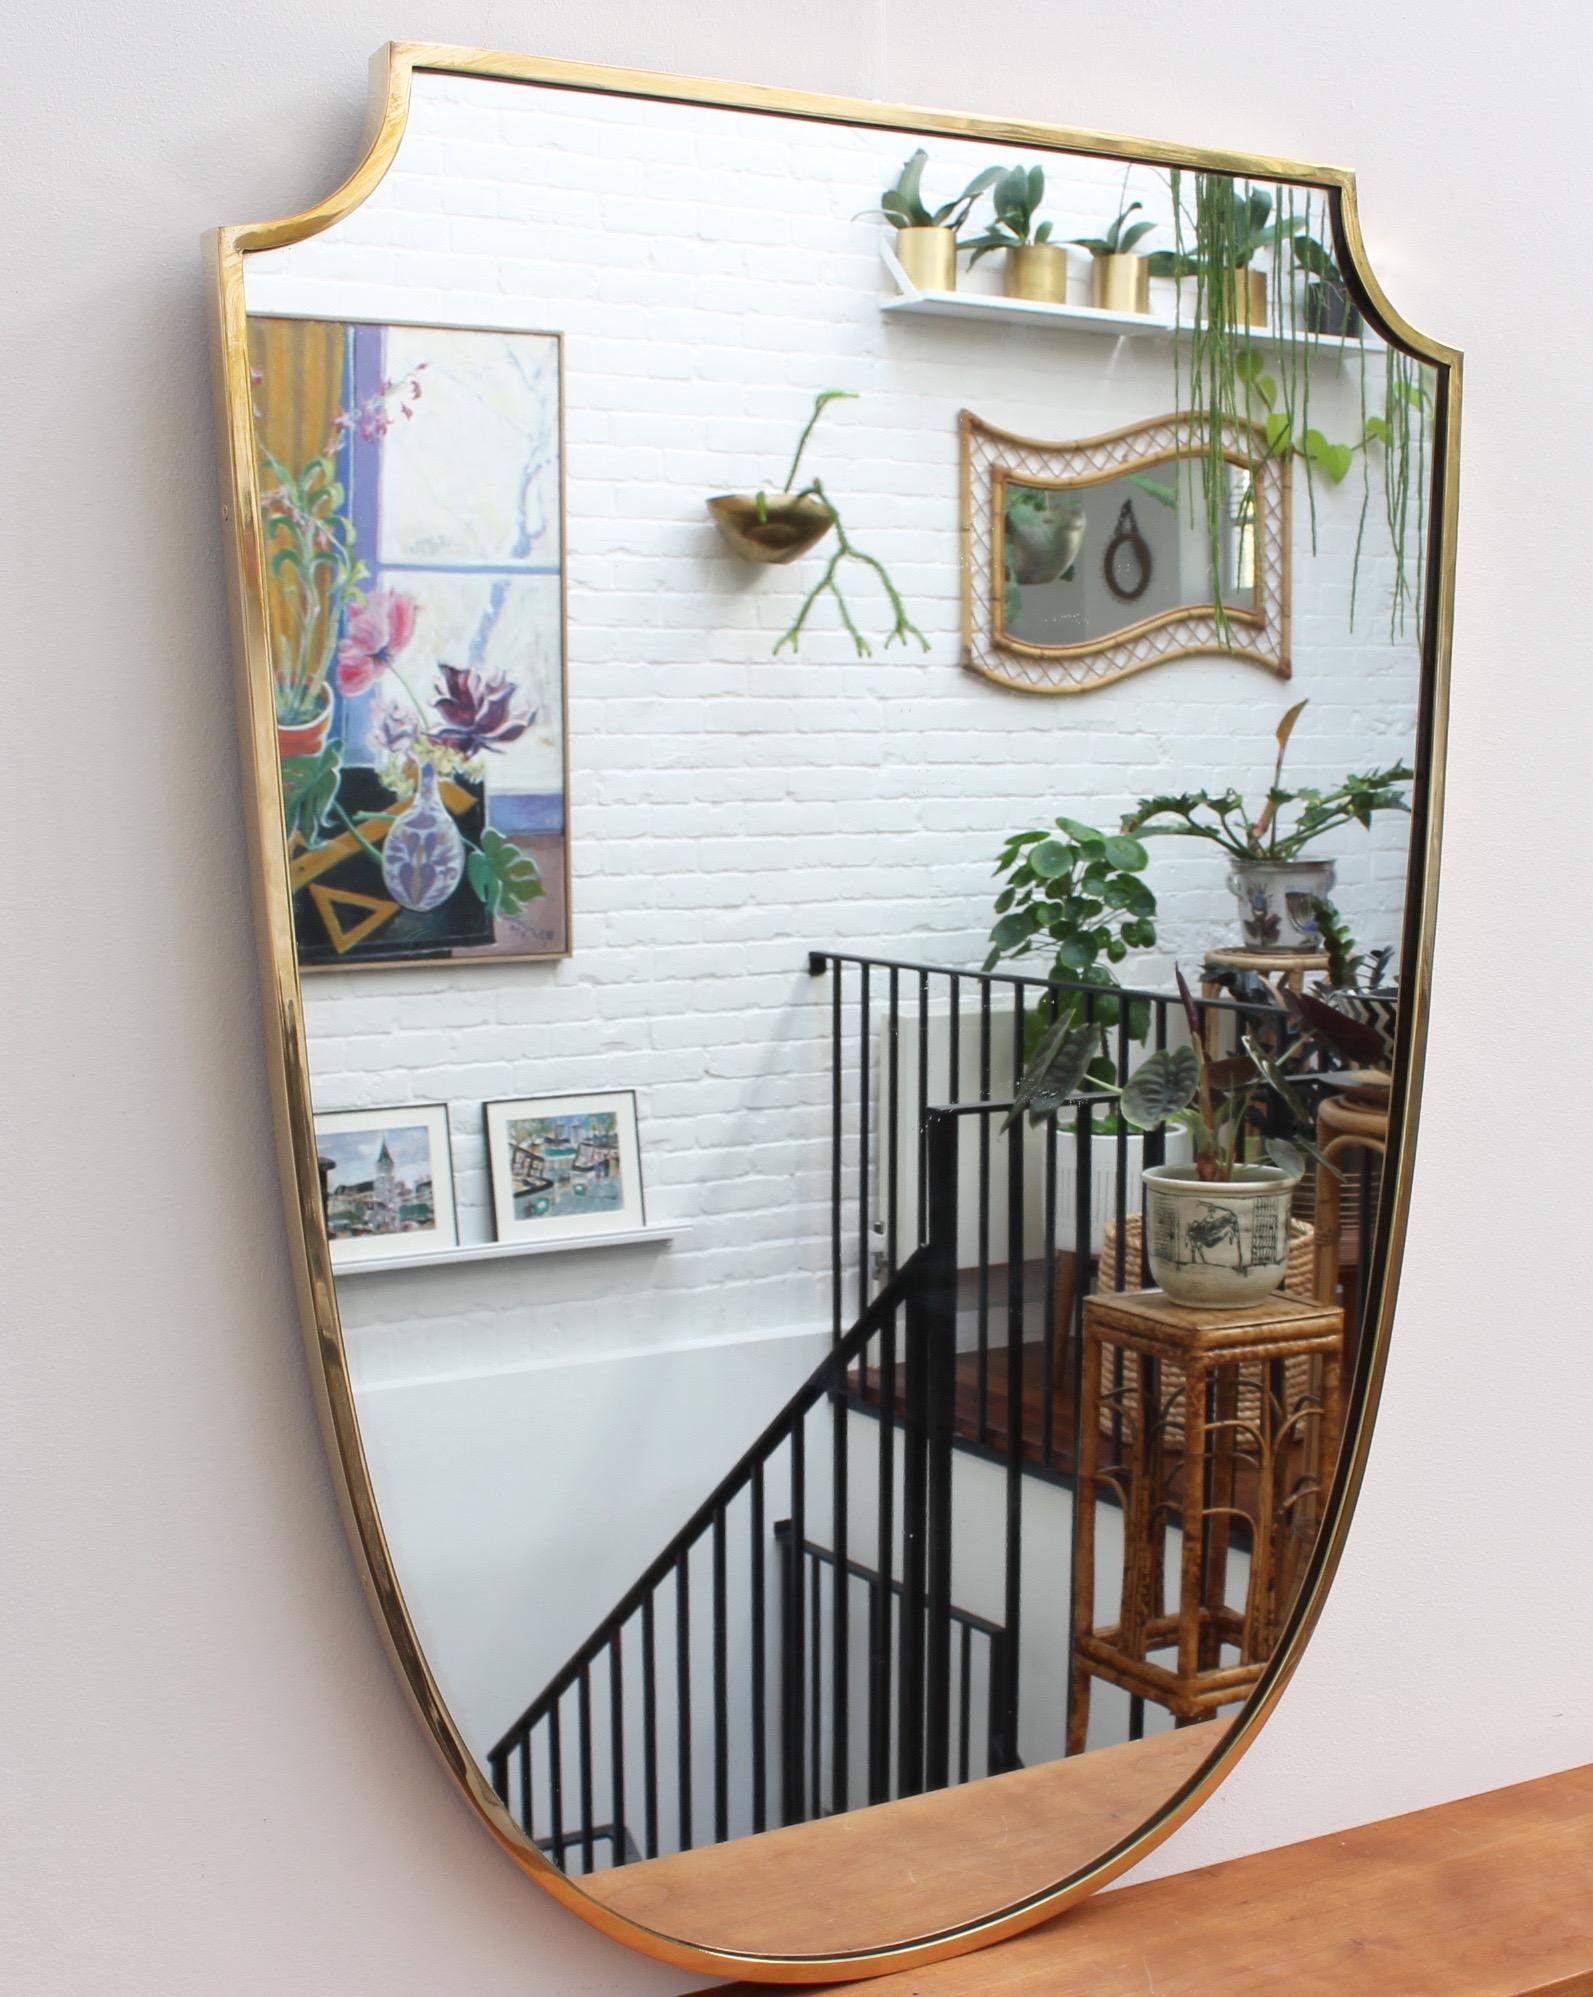 Large midcentury Italian wall mirror with brass frame (circa 1950s). The mirror is crest-shaped - classically elegant and distinct in a modern Gio Ponti style. The piece is in very good vintage condition commensurate with age and usage. A short